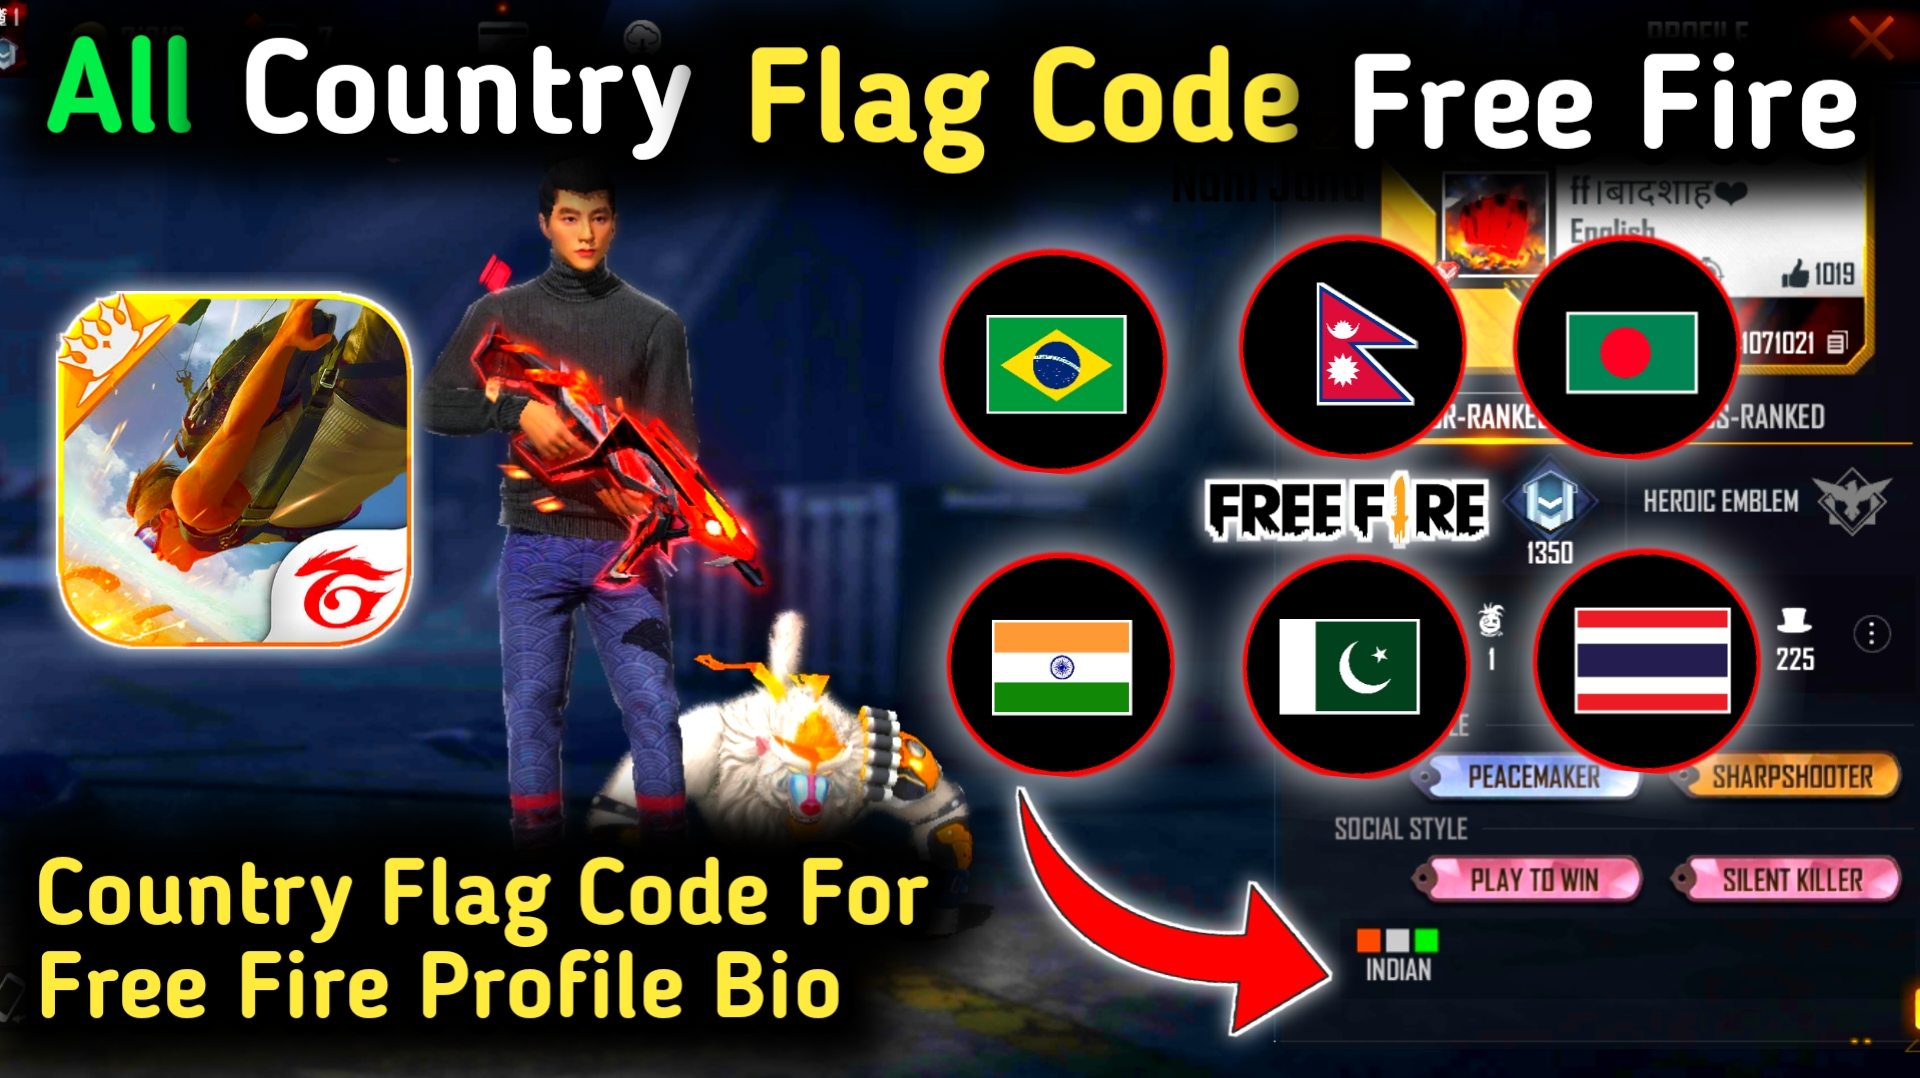 Free Fire All Country Flag Code